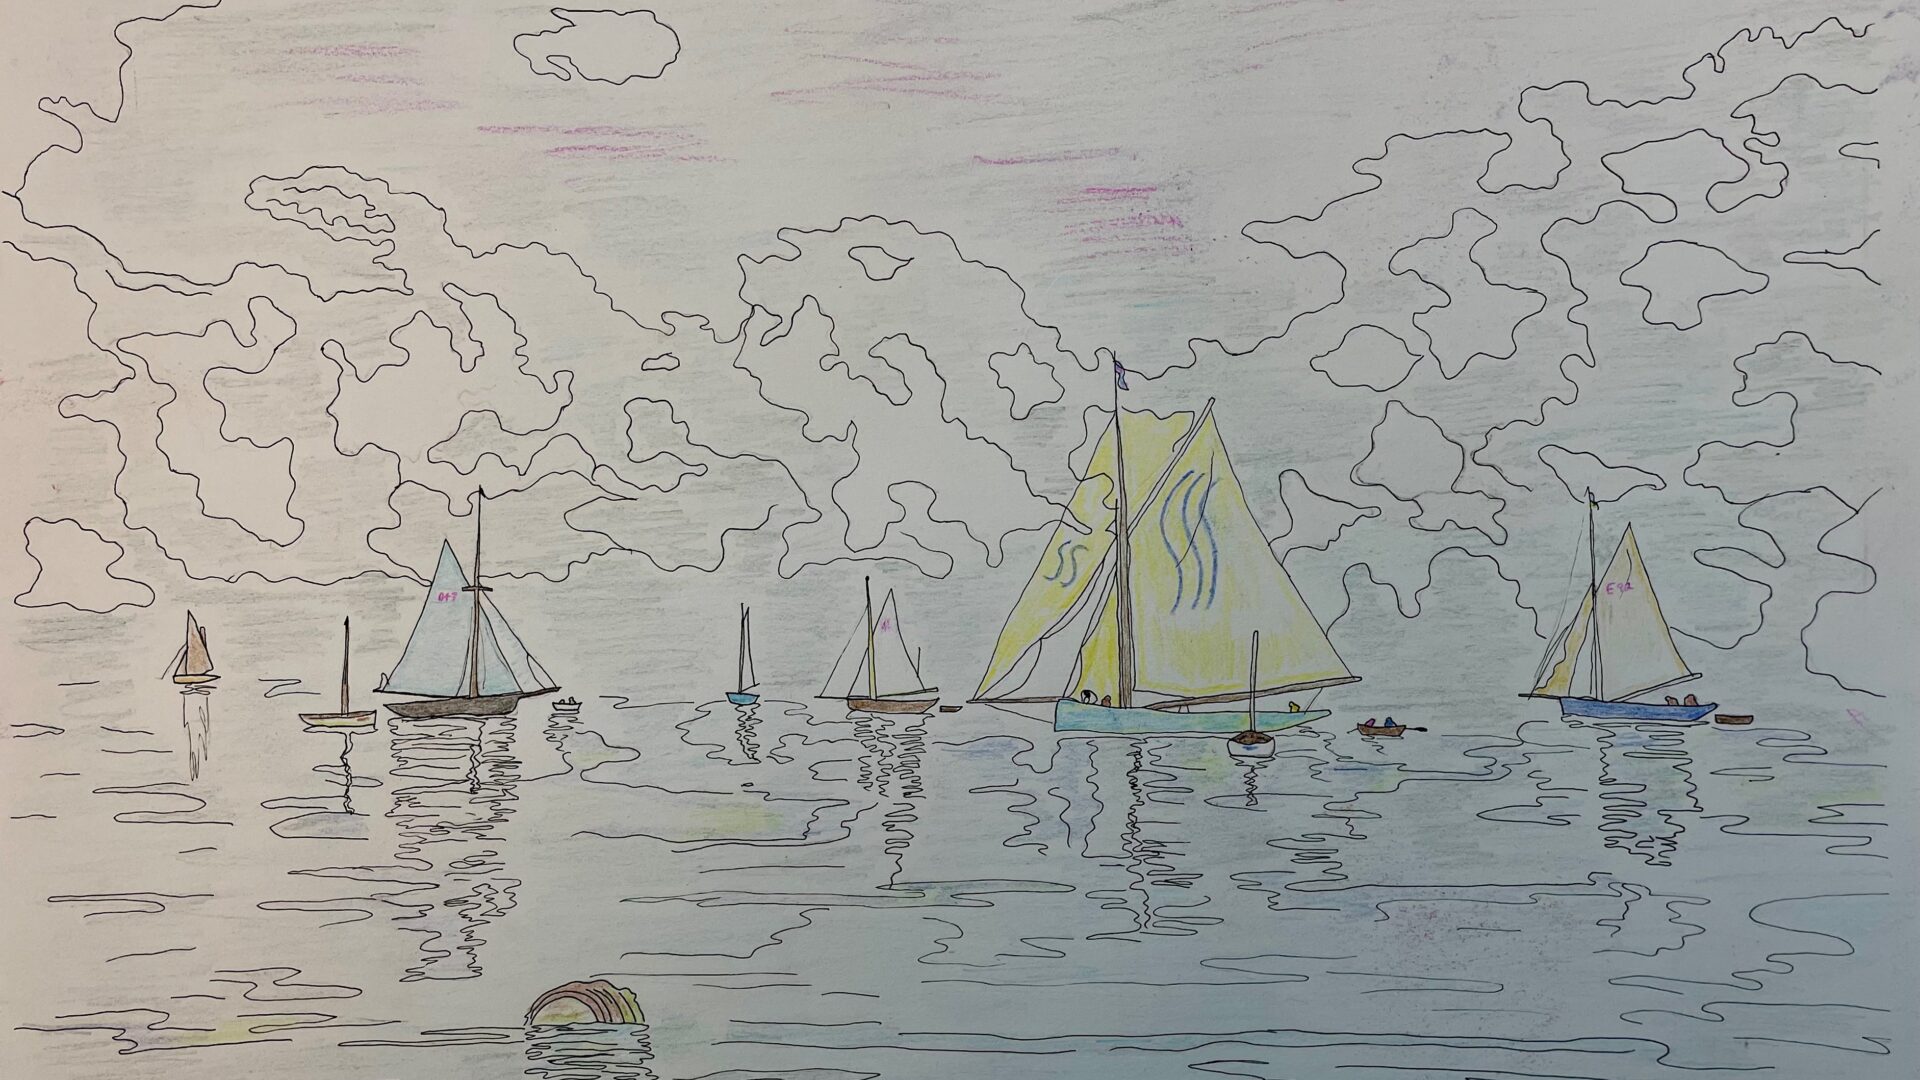 Image of a colourful drawing of seven boats sailing on the sea